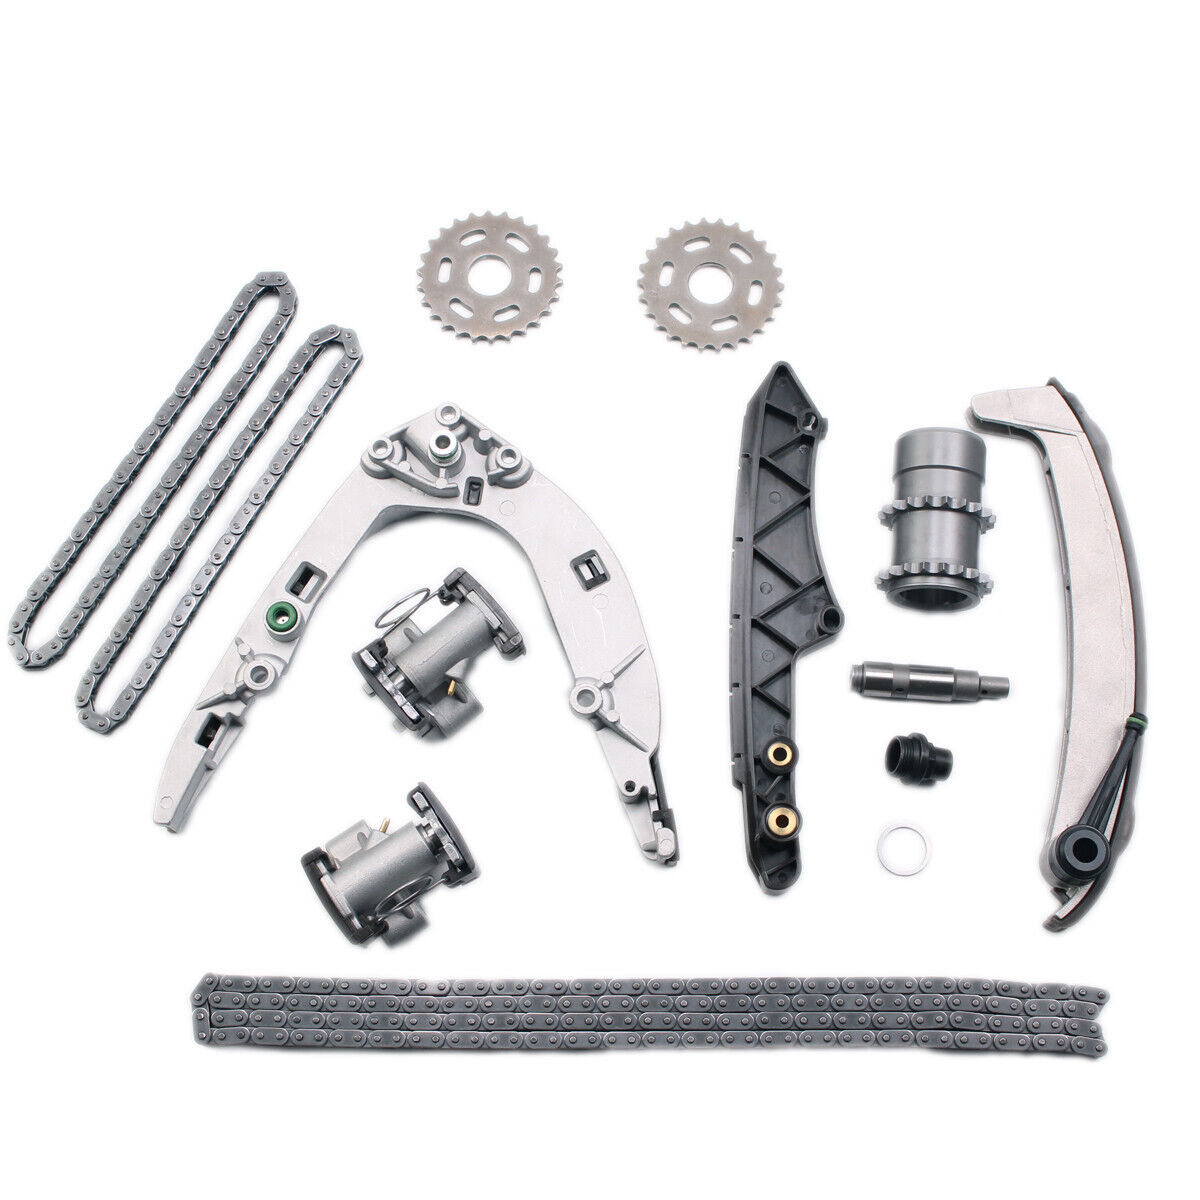 Timing Chain Kit For BMW 540I 740I 740IL 840Ci X5 Z8 LAND ROVER RANGE ROVER 4.4L